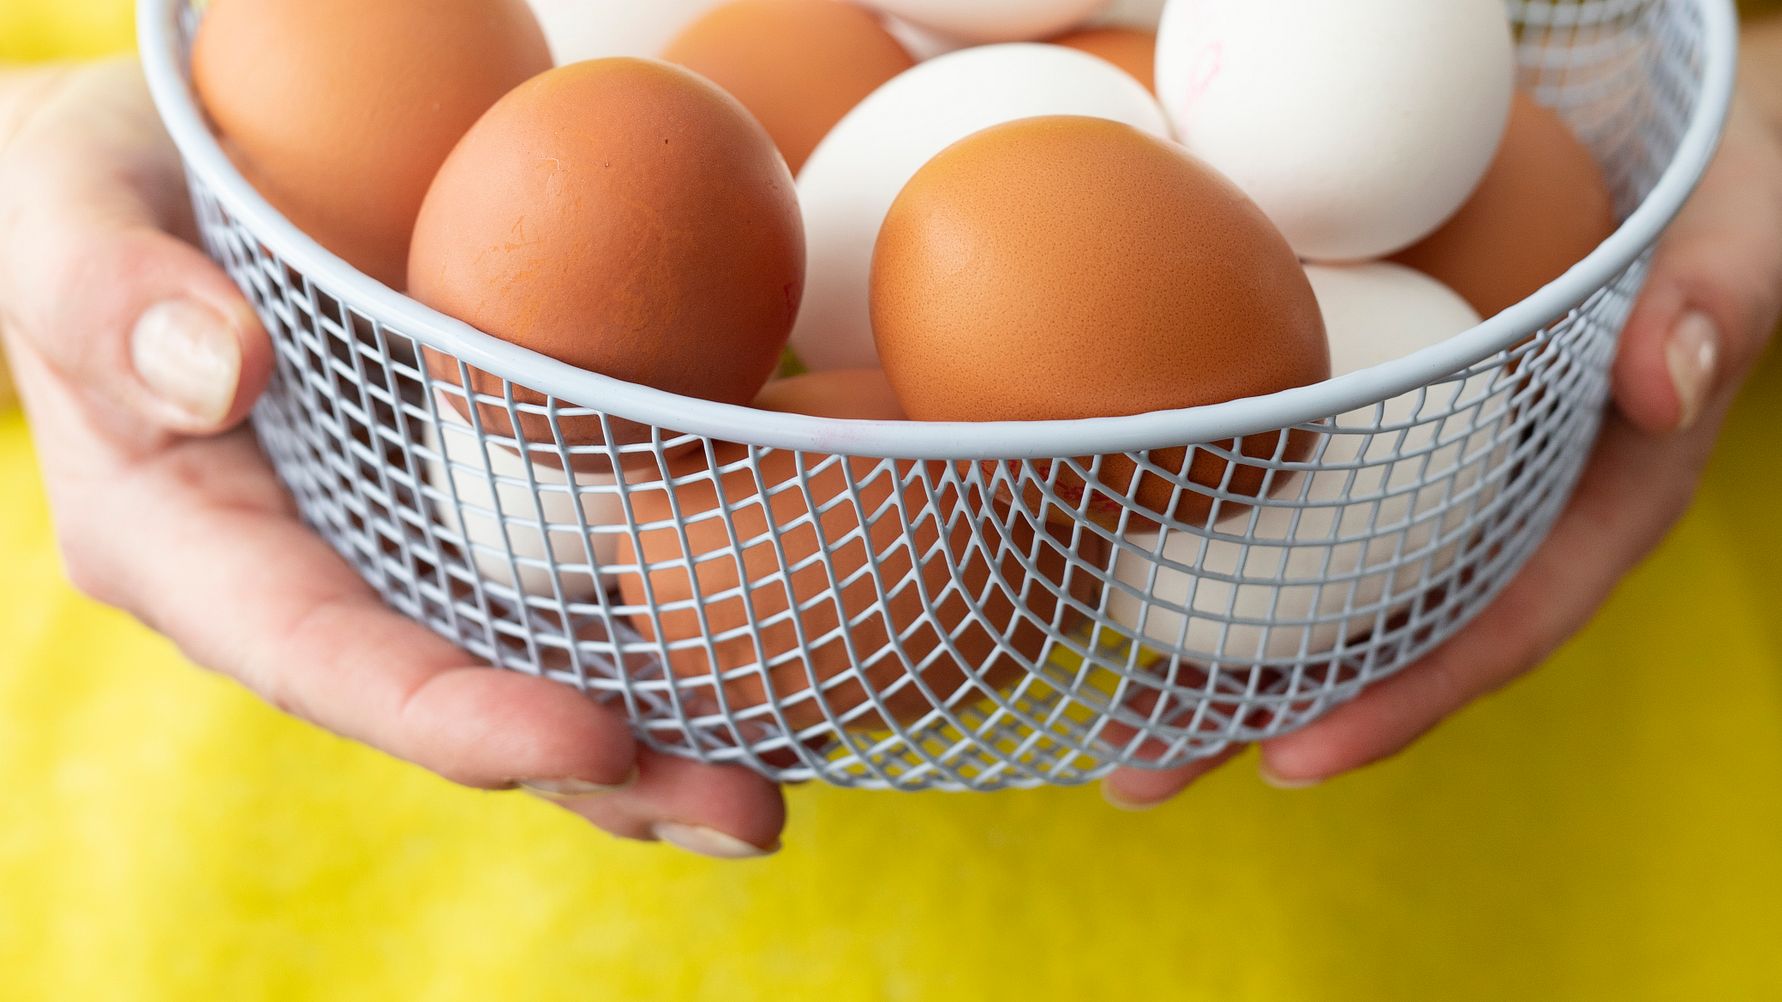 Do you also suffer from vitamin D deficiency?  The egg is full of the sunshine vitamin